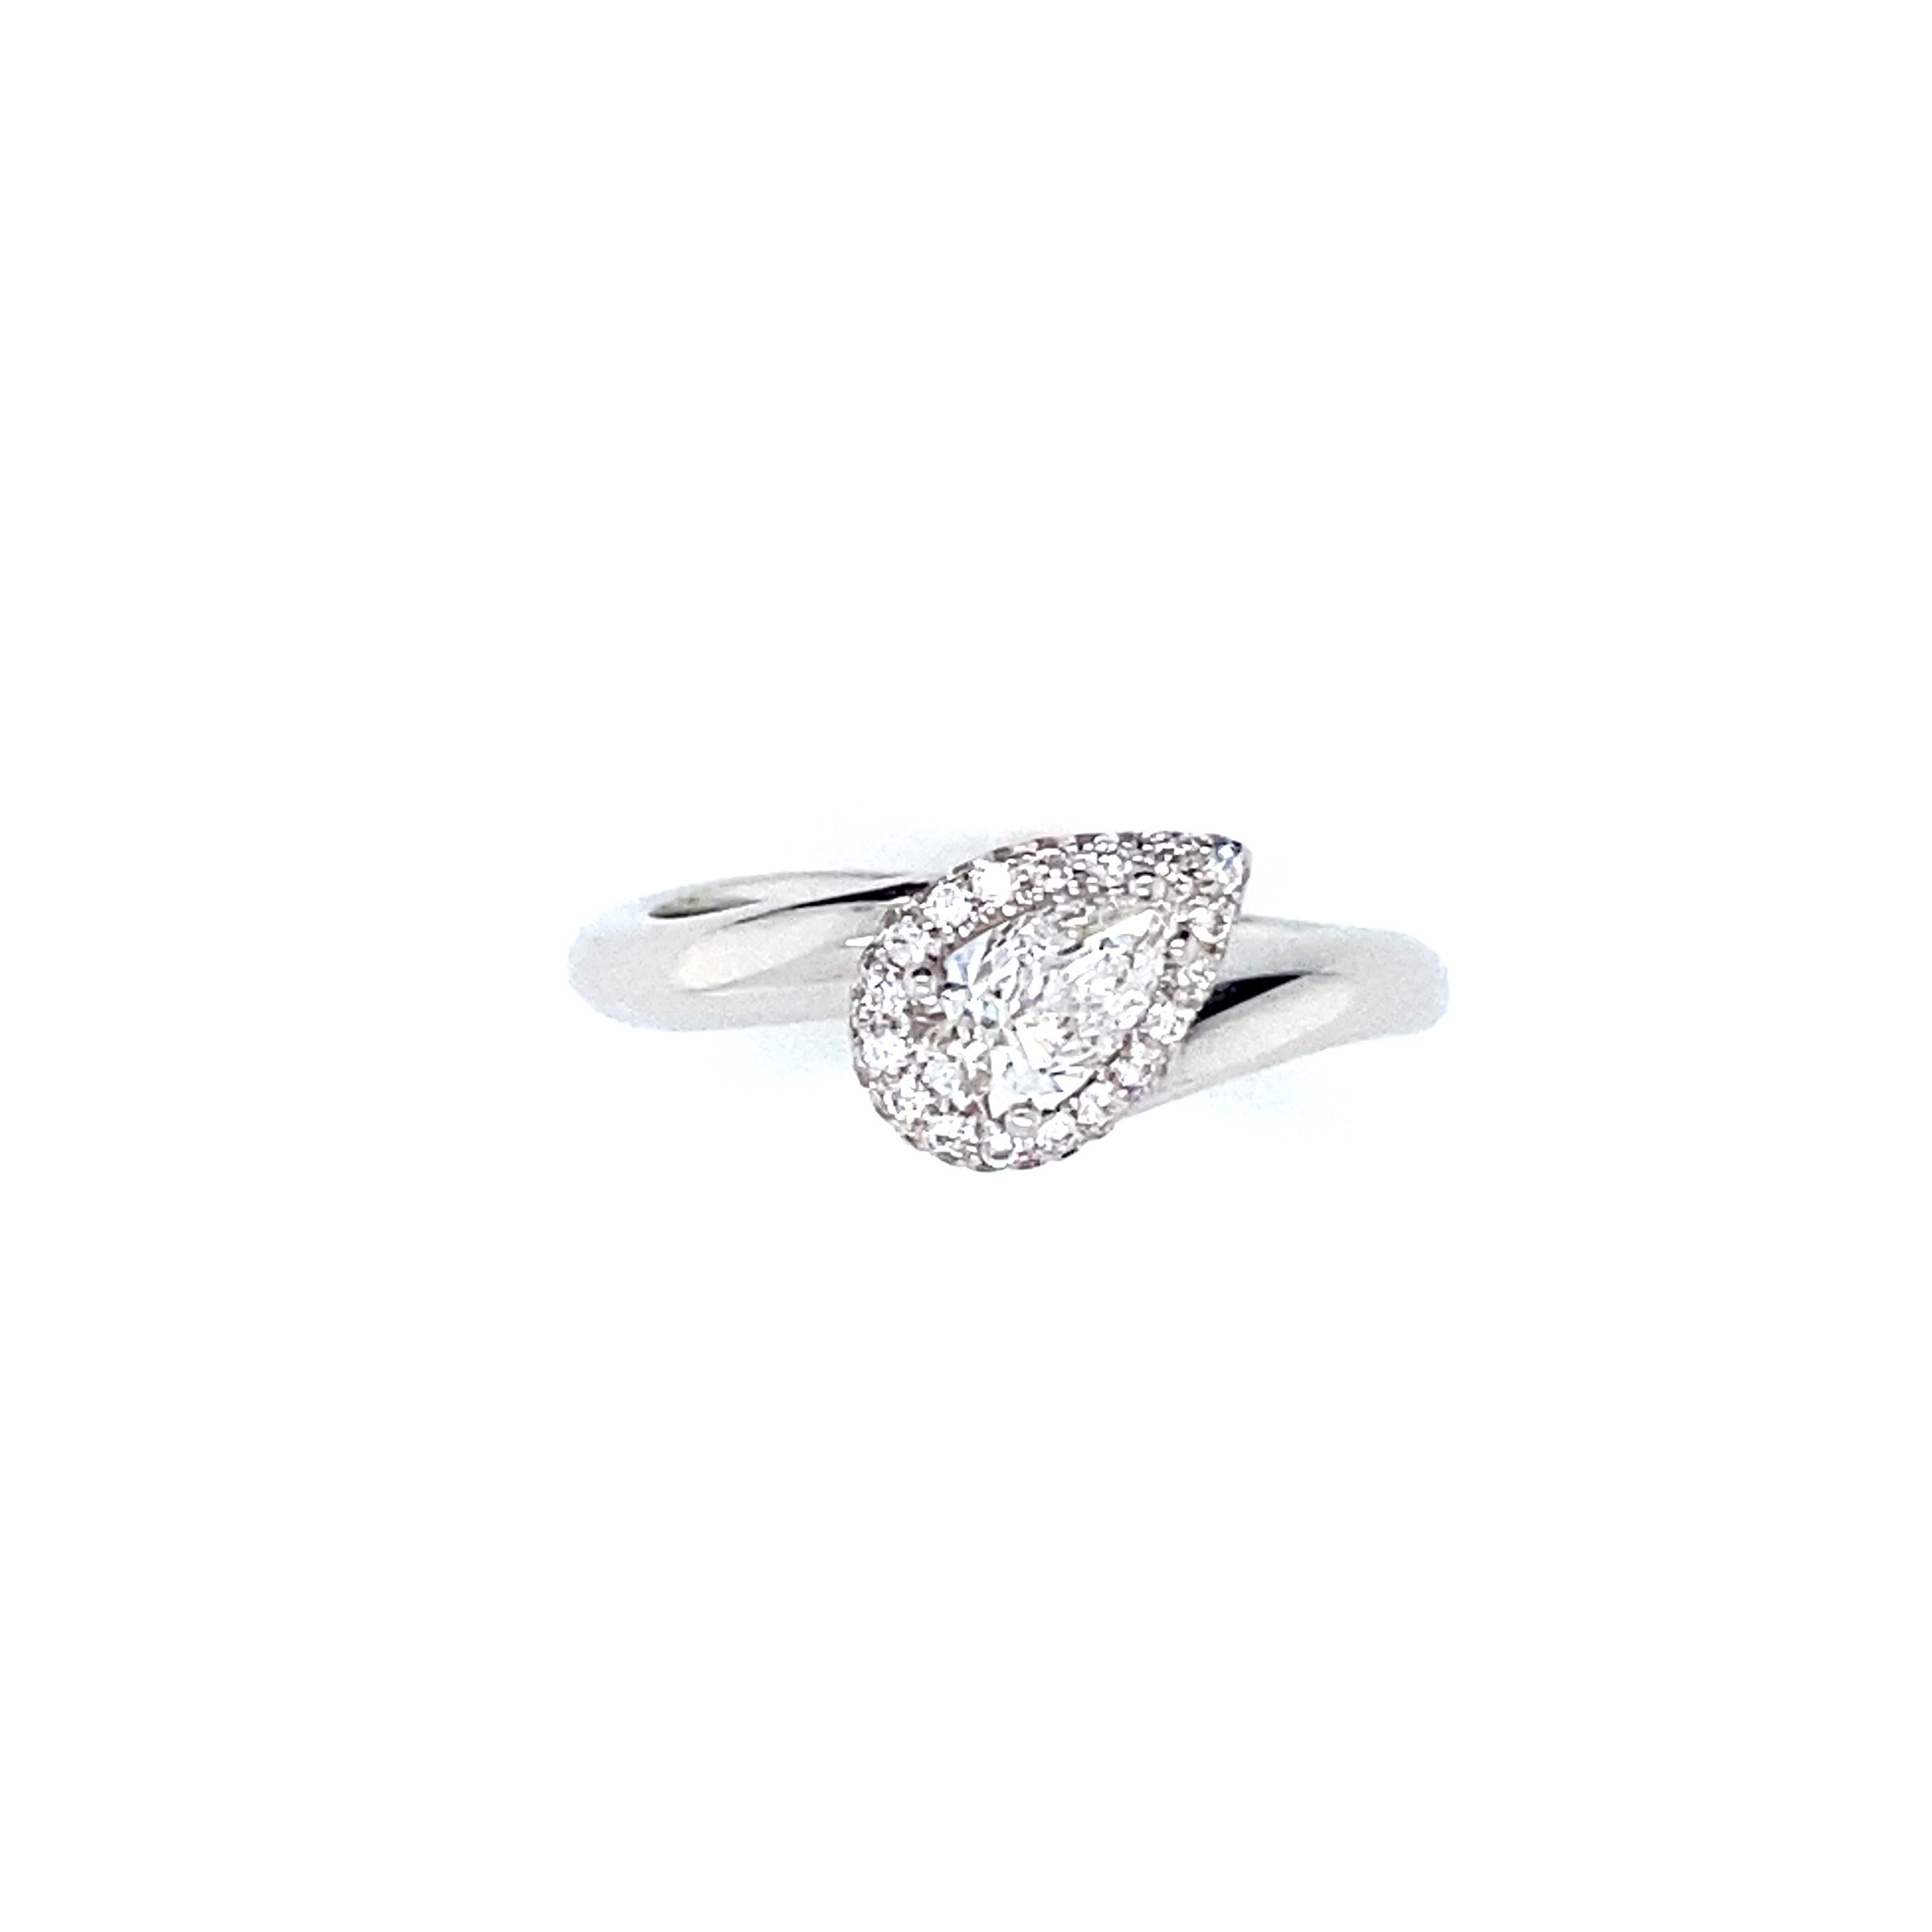 Welcome to our home, where we are delighted to present this stunning White Gold ring, cut with a certified pear-shaped diamond, a creation of timeless elegance and beauty.

This White Gold ring is an exceptional piece, designed to capture attention